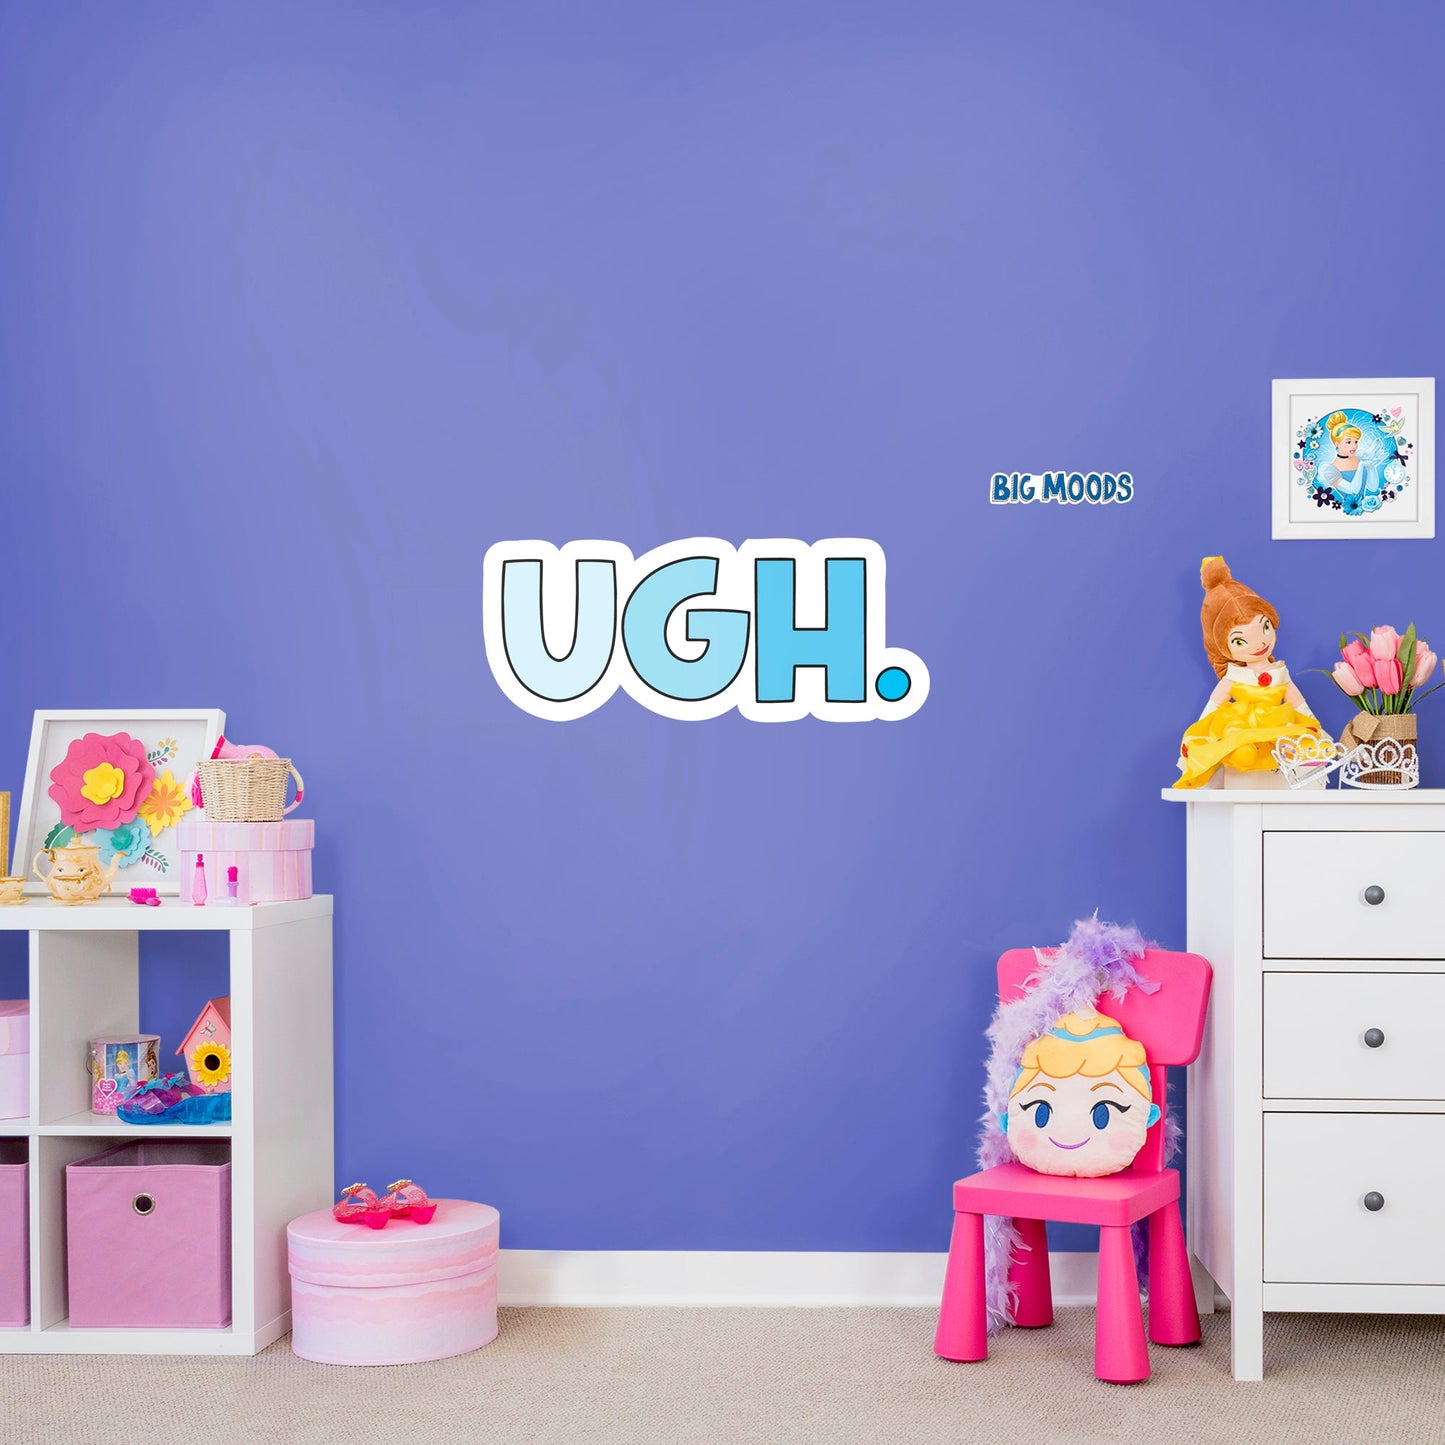 Ugh (Blue)        - Officially Licensed Big Moods Removable     Adhesive Decal